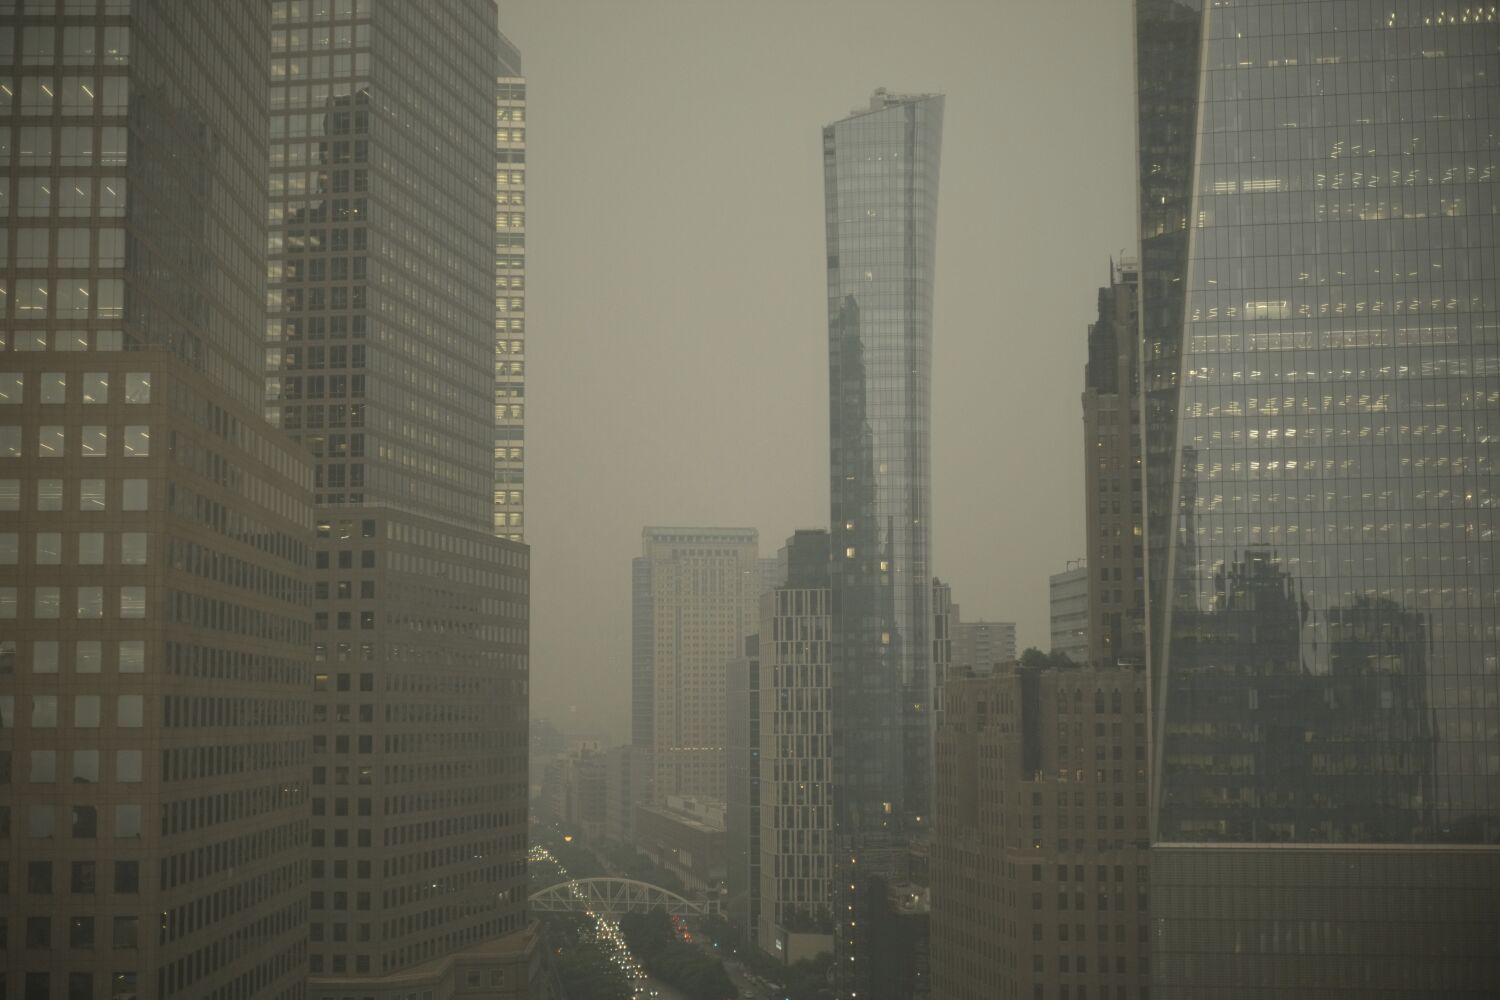 Wildfire smoke has given New York the world's worst air quality. Californians have some tips